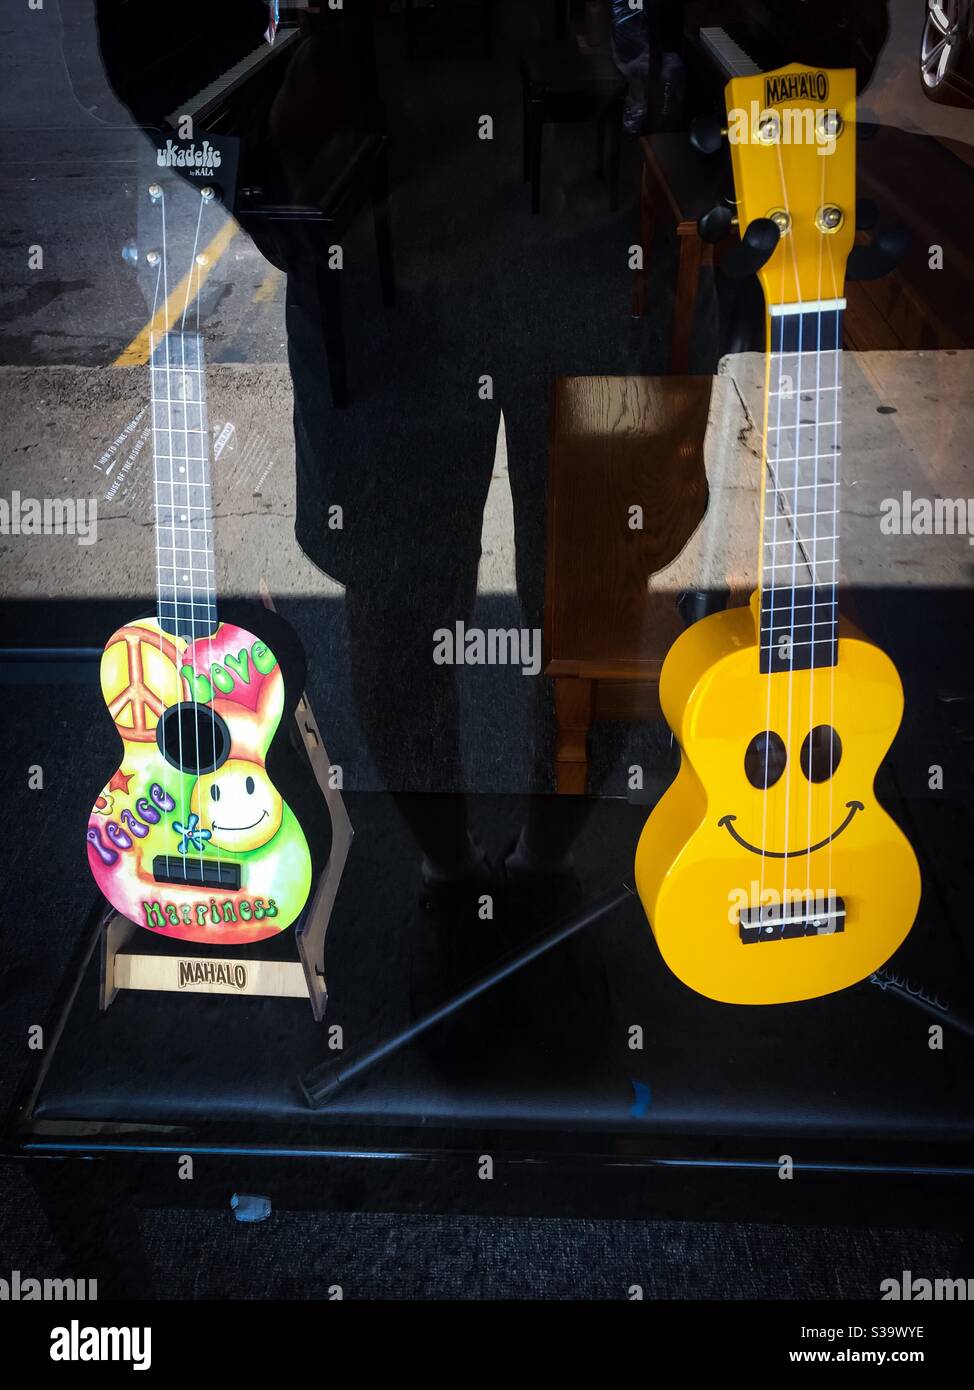 Playful and smiling guitars in a store window Stock Photo